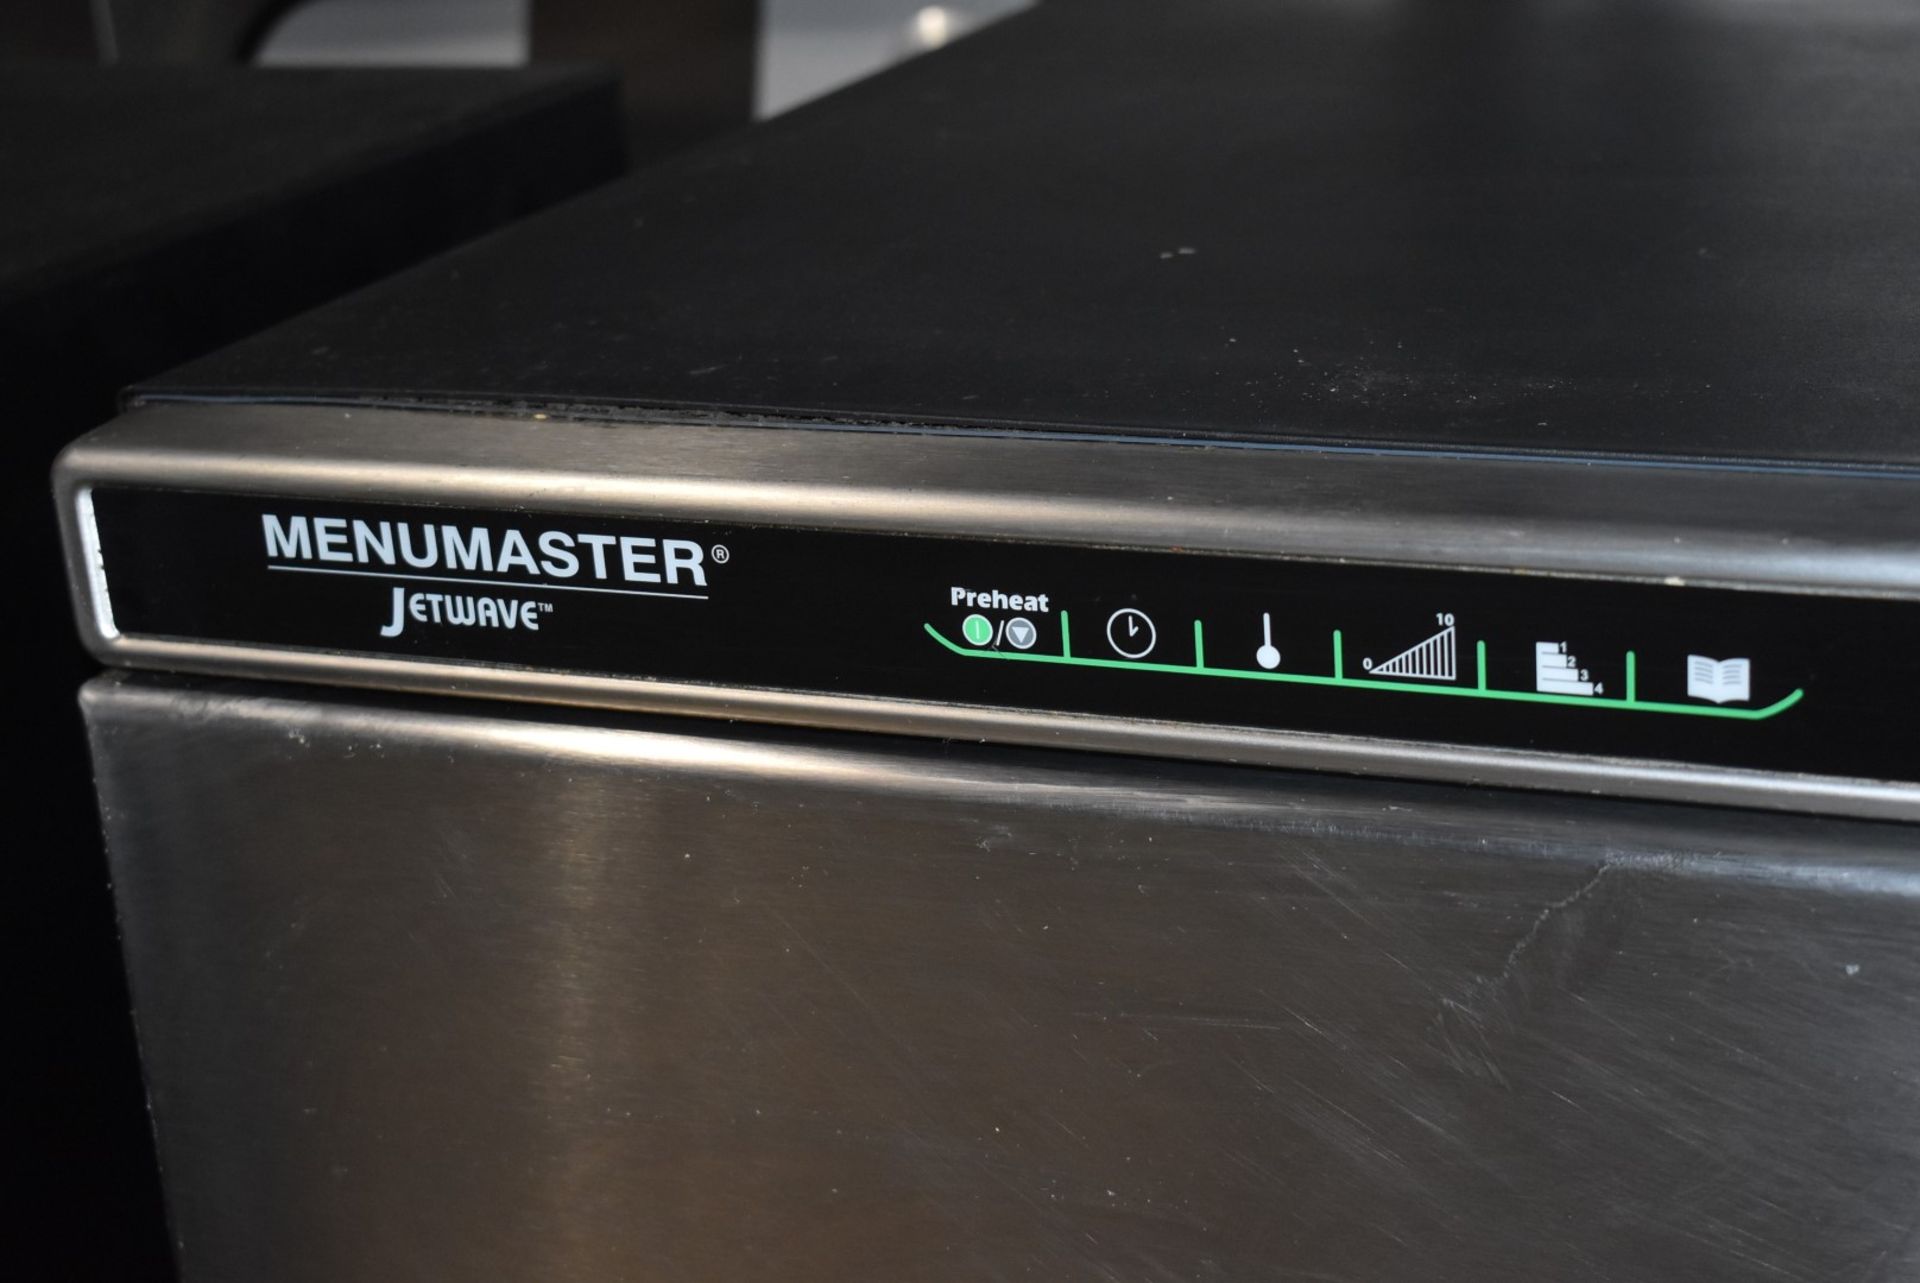 1 x Menumaster Jetwave JET514U High Speed Combination Microwave Oven - RRP £2,400 - Recently Removed - Image 7 of 11